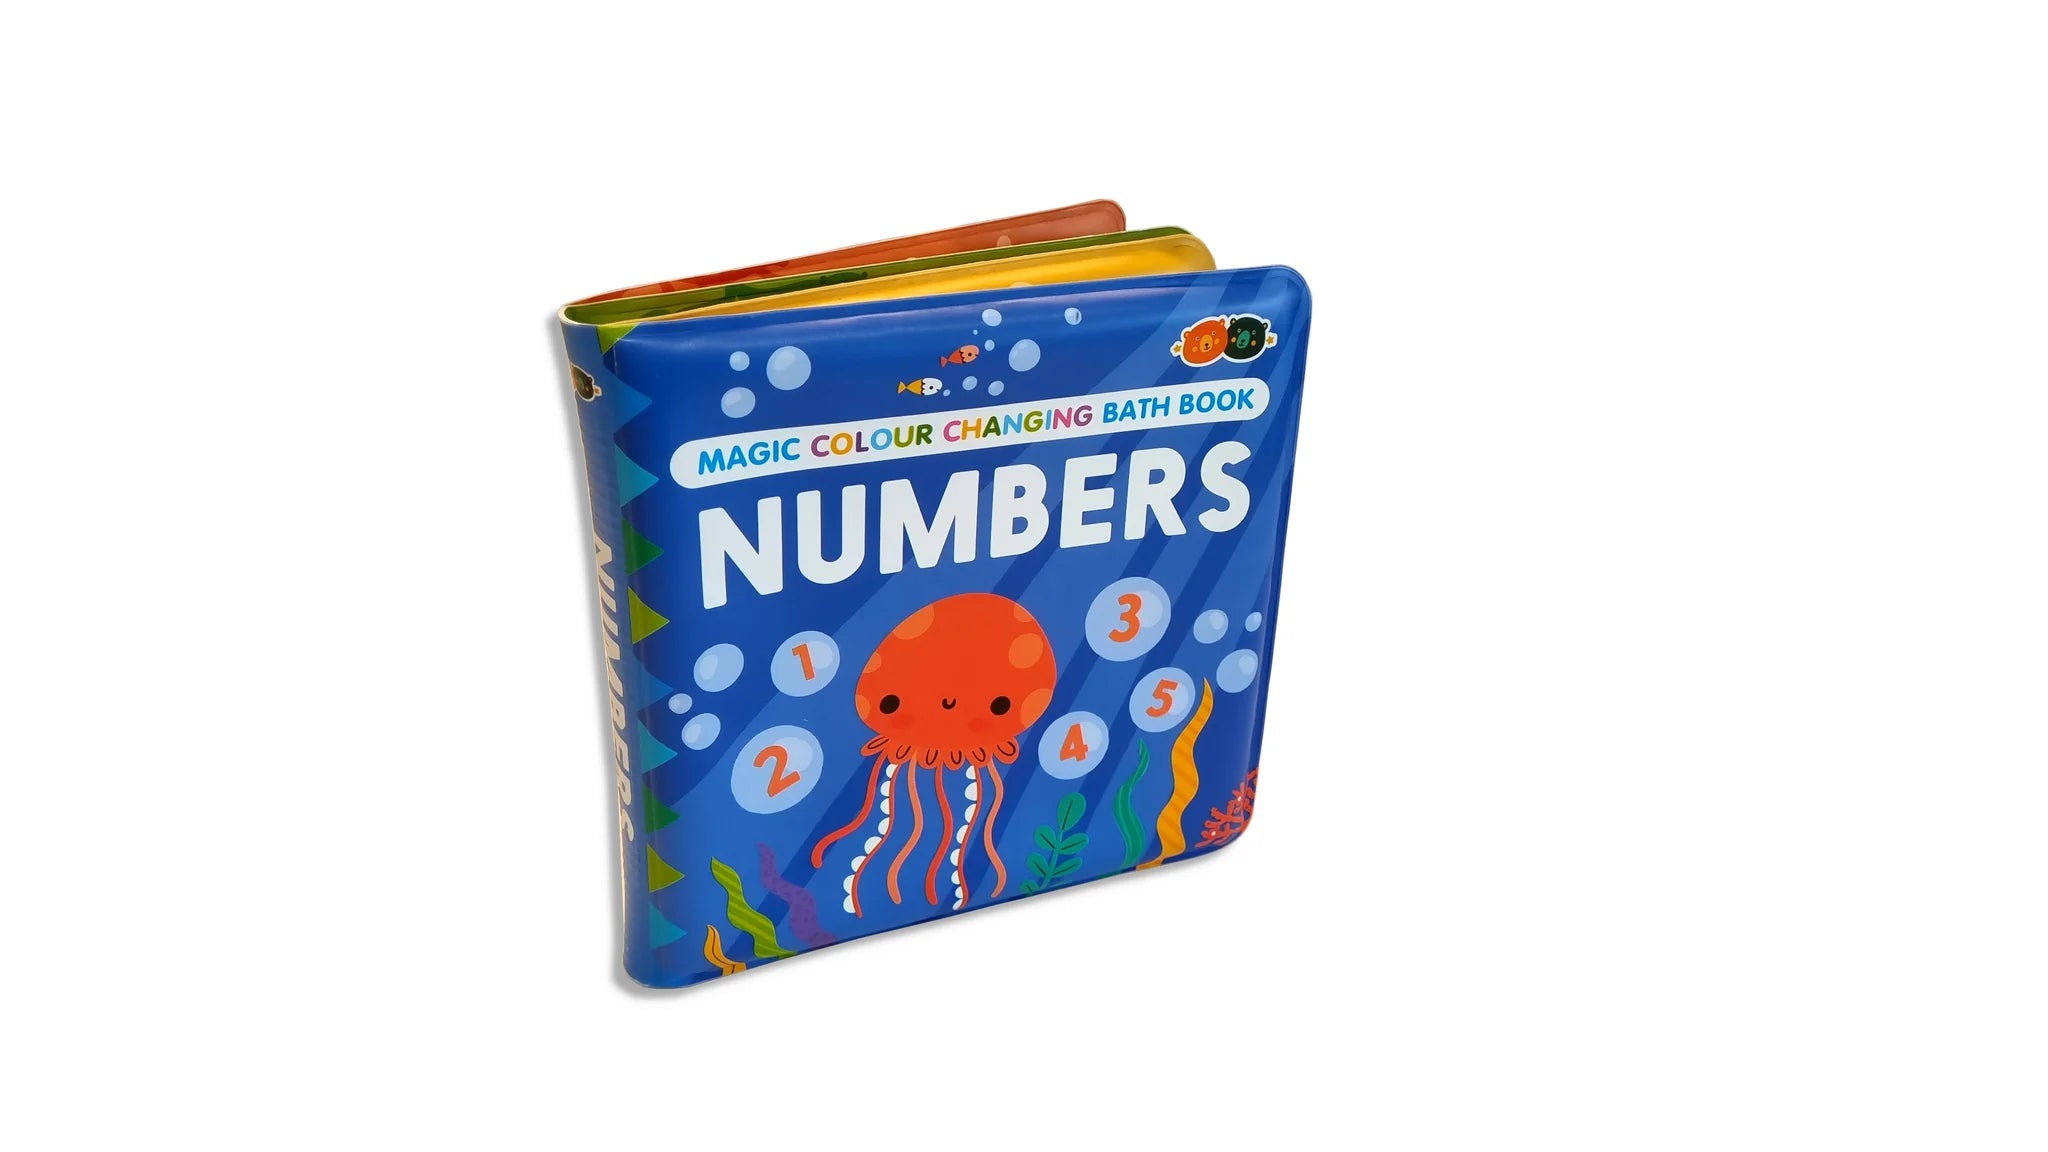 Magic Colour Changing Bath Book Numbers